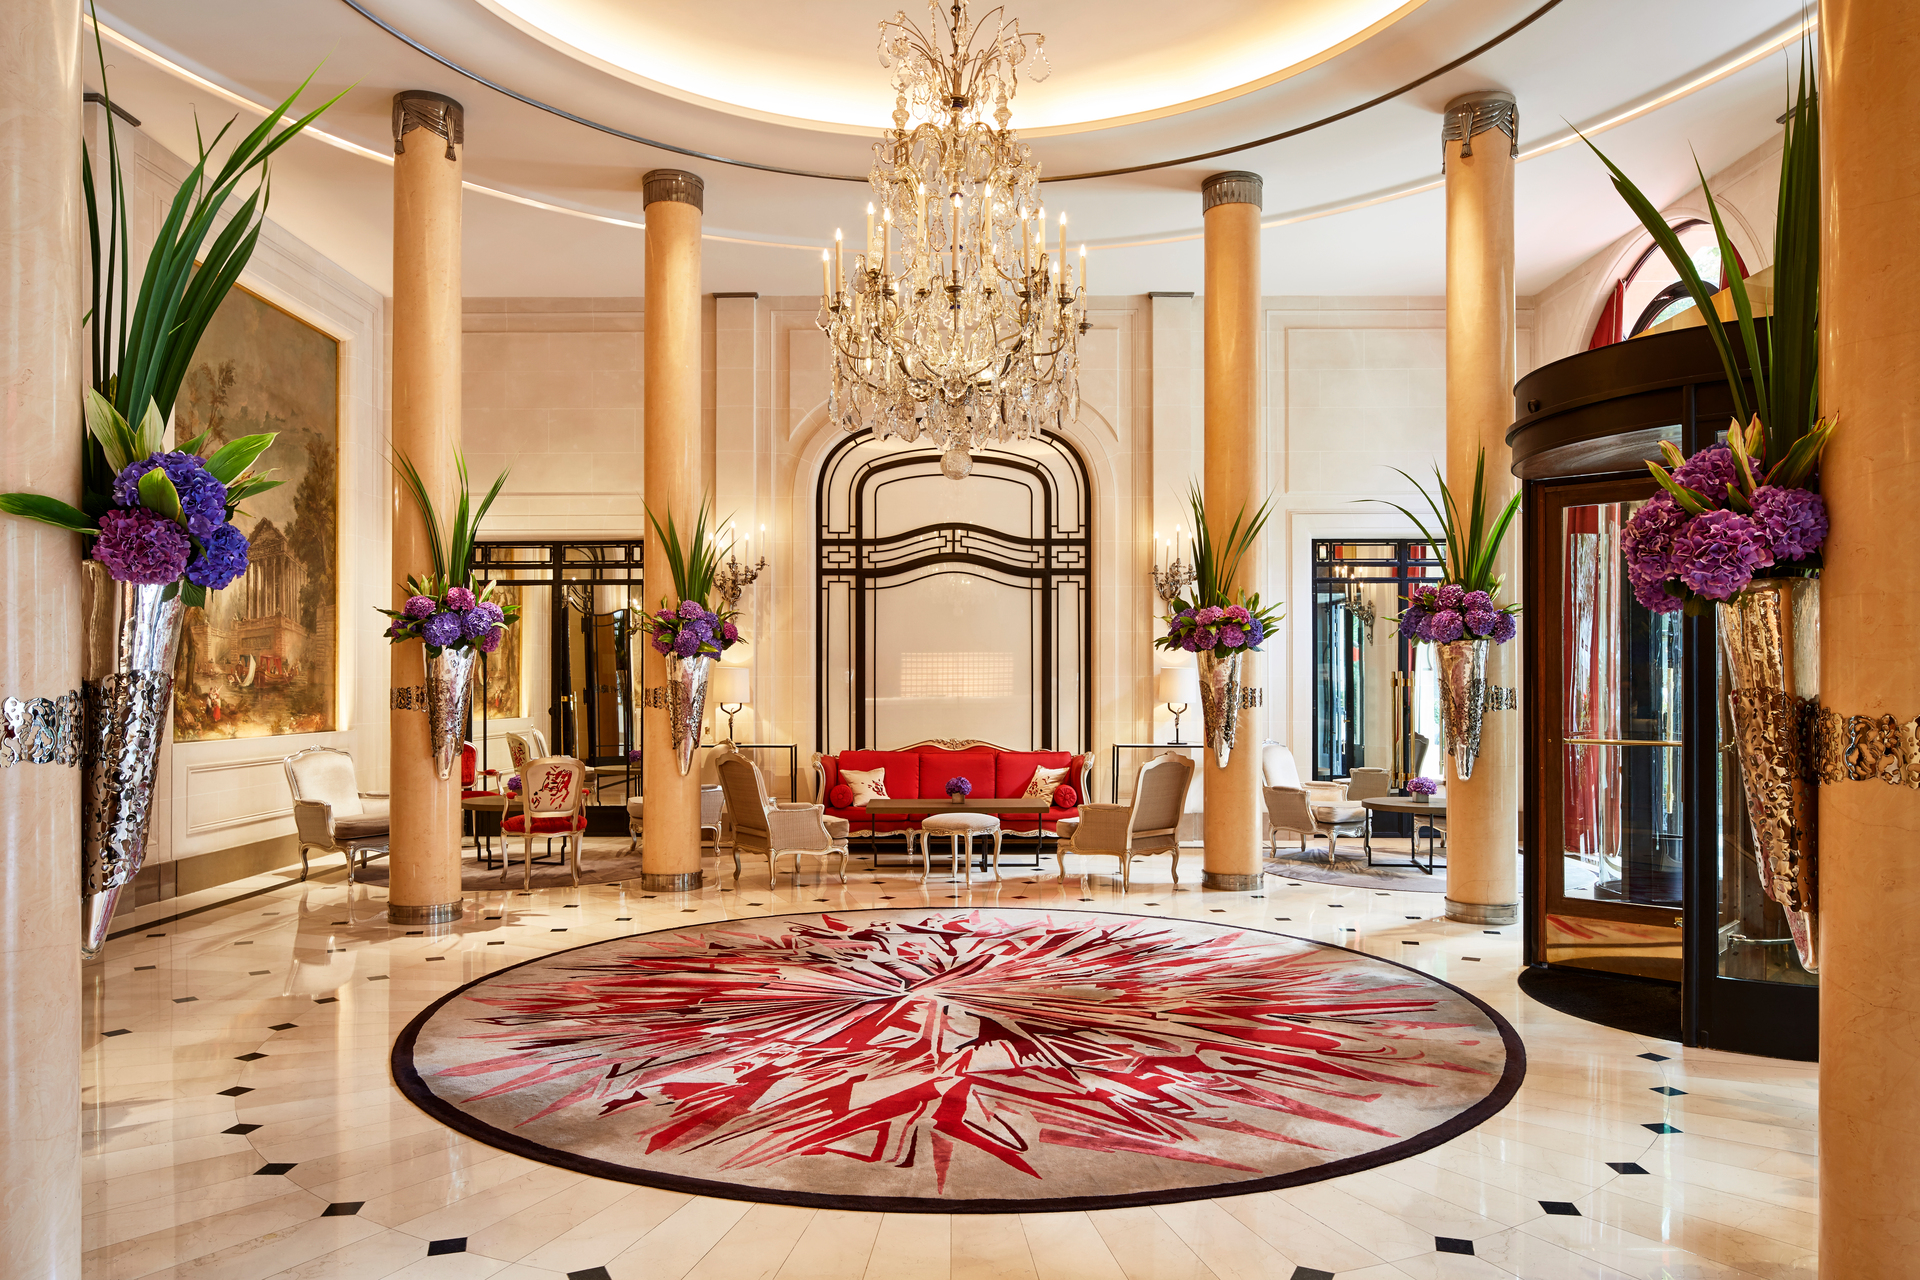 The Hotel Plaza Athenee is a Brunei-owned historic luxury hotel in Paris,  France. It is located at 25 Avenue Montaigne in the 8th arrondissement of  Paris, near the Champs-Elysees. Stock Photo